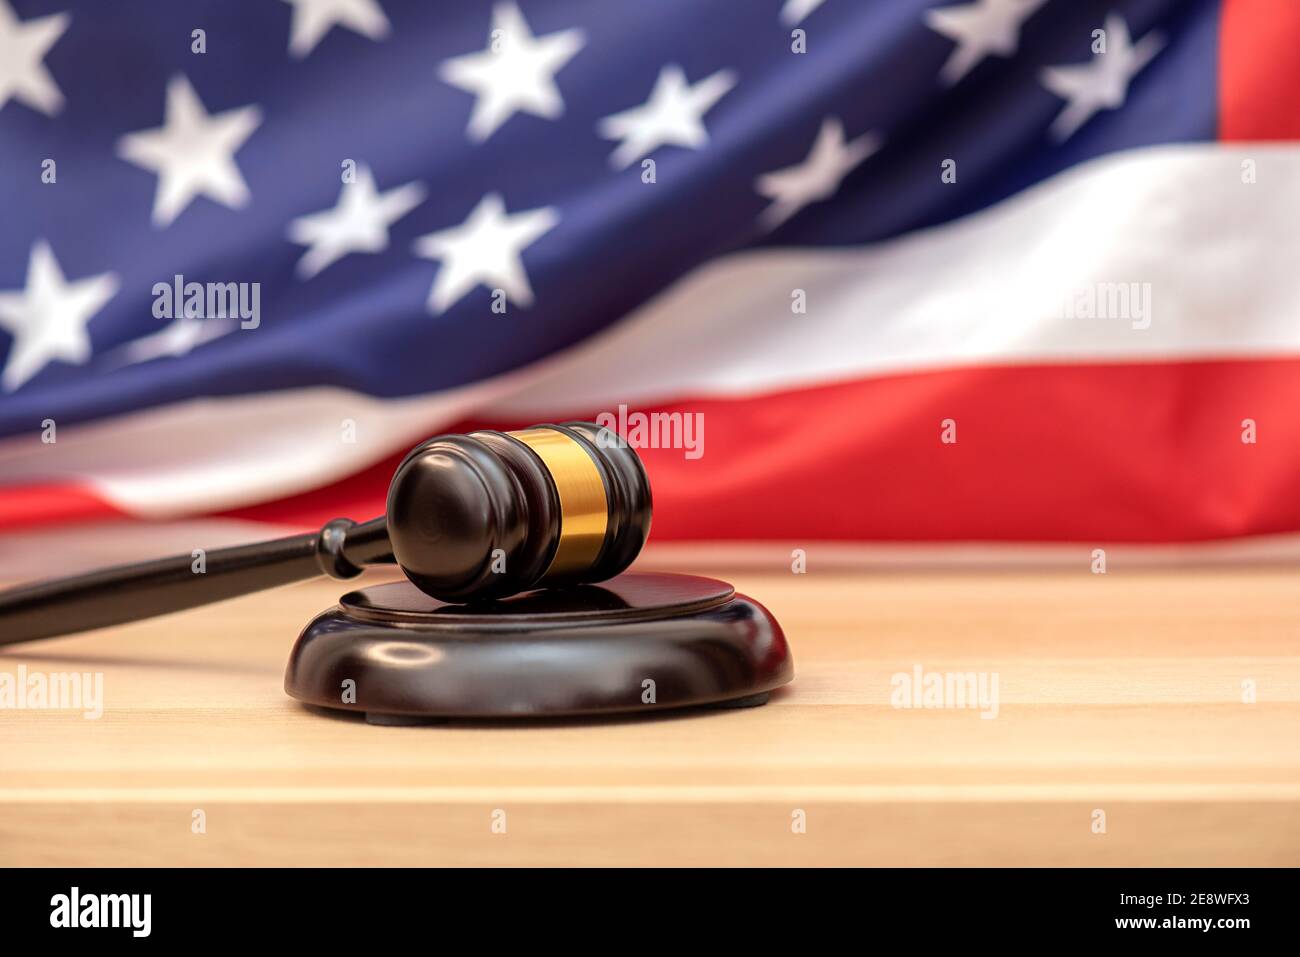 Wooden judge gavel USA flag as background, concept picture about justice in the USA Stock Photo